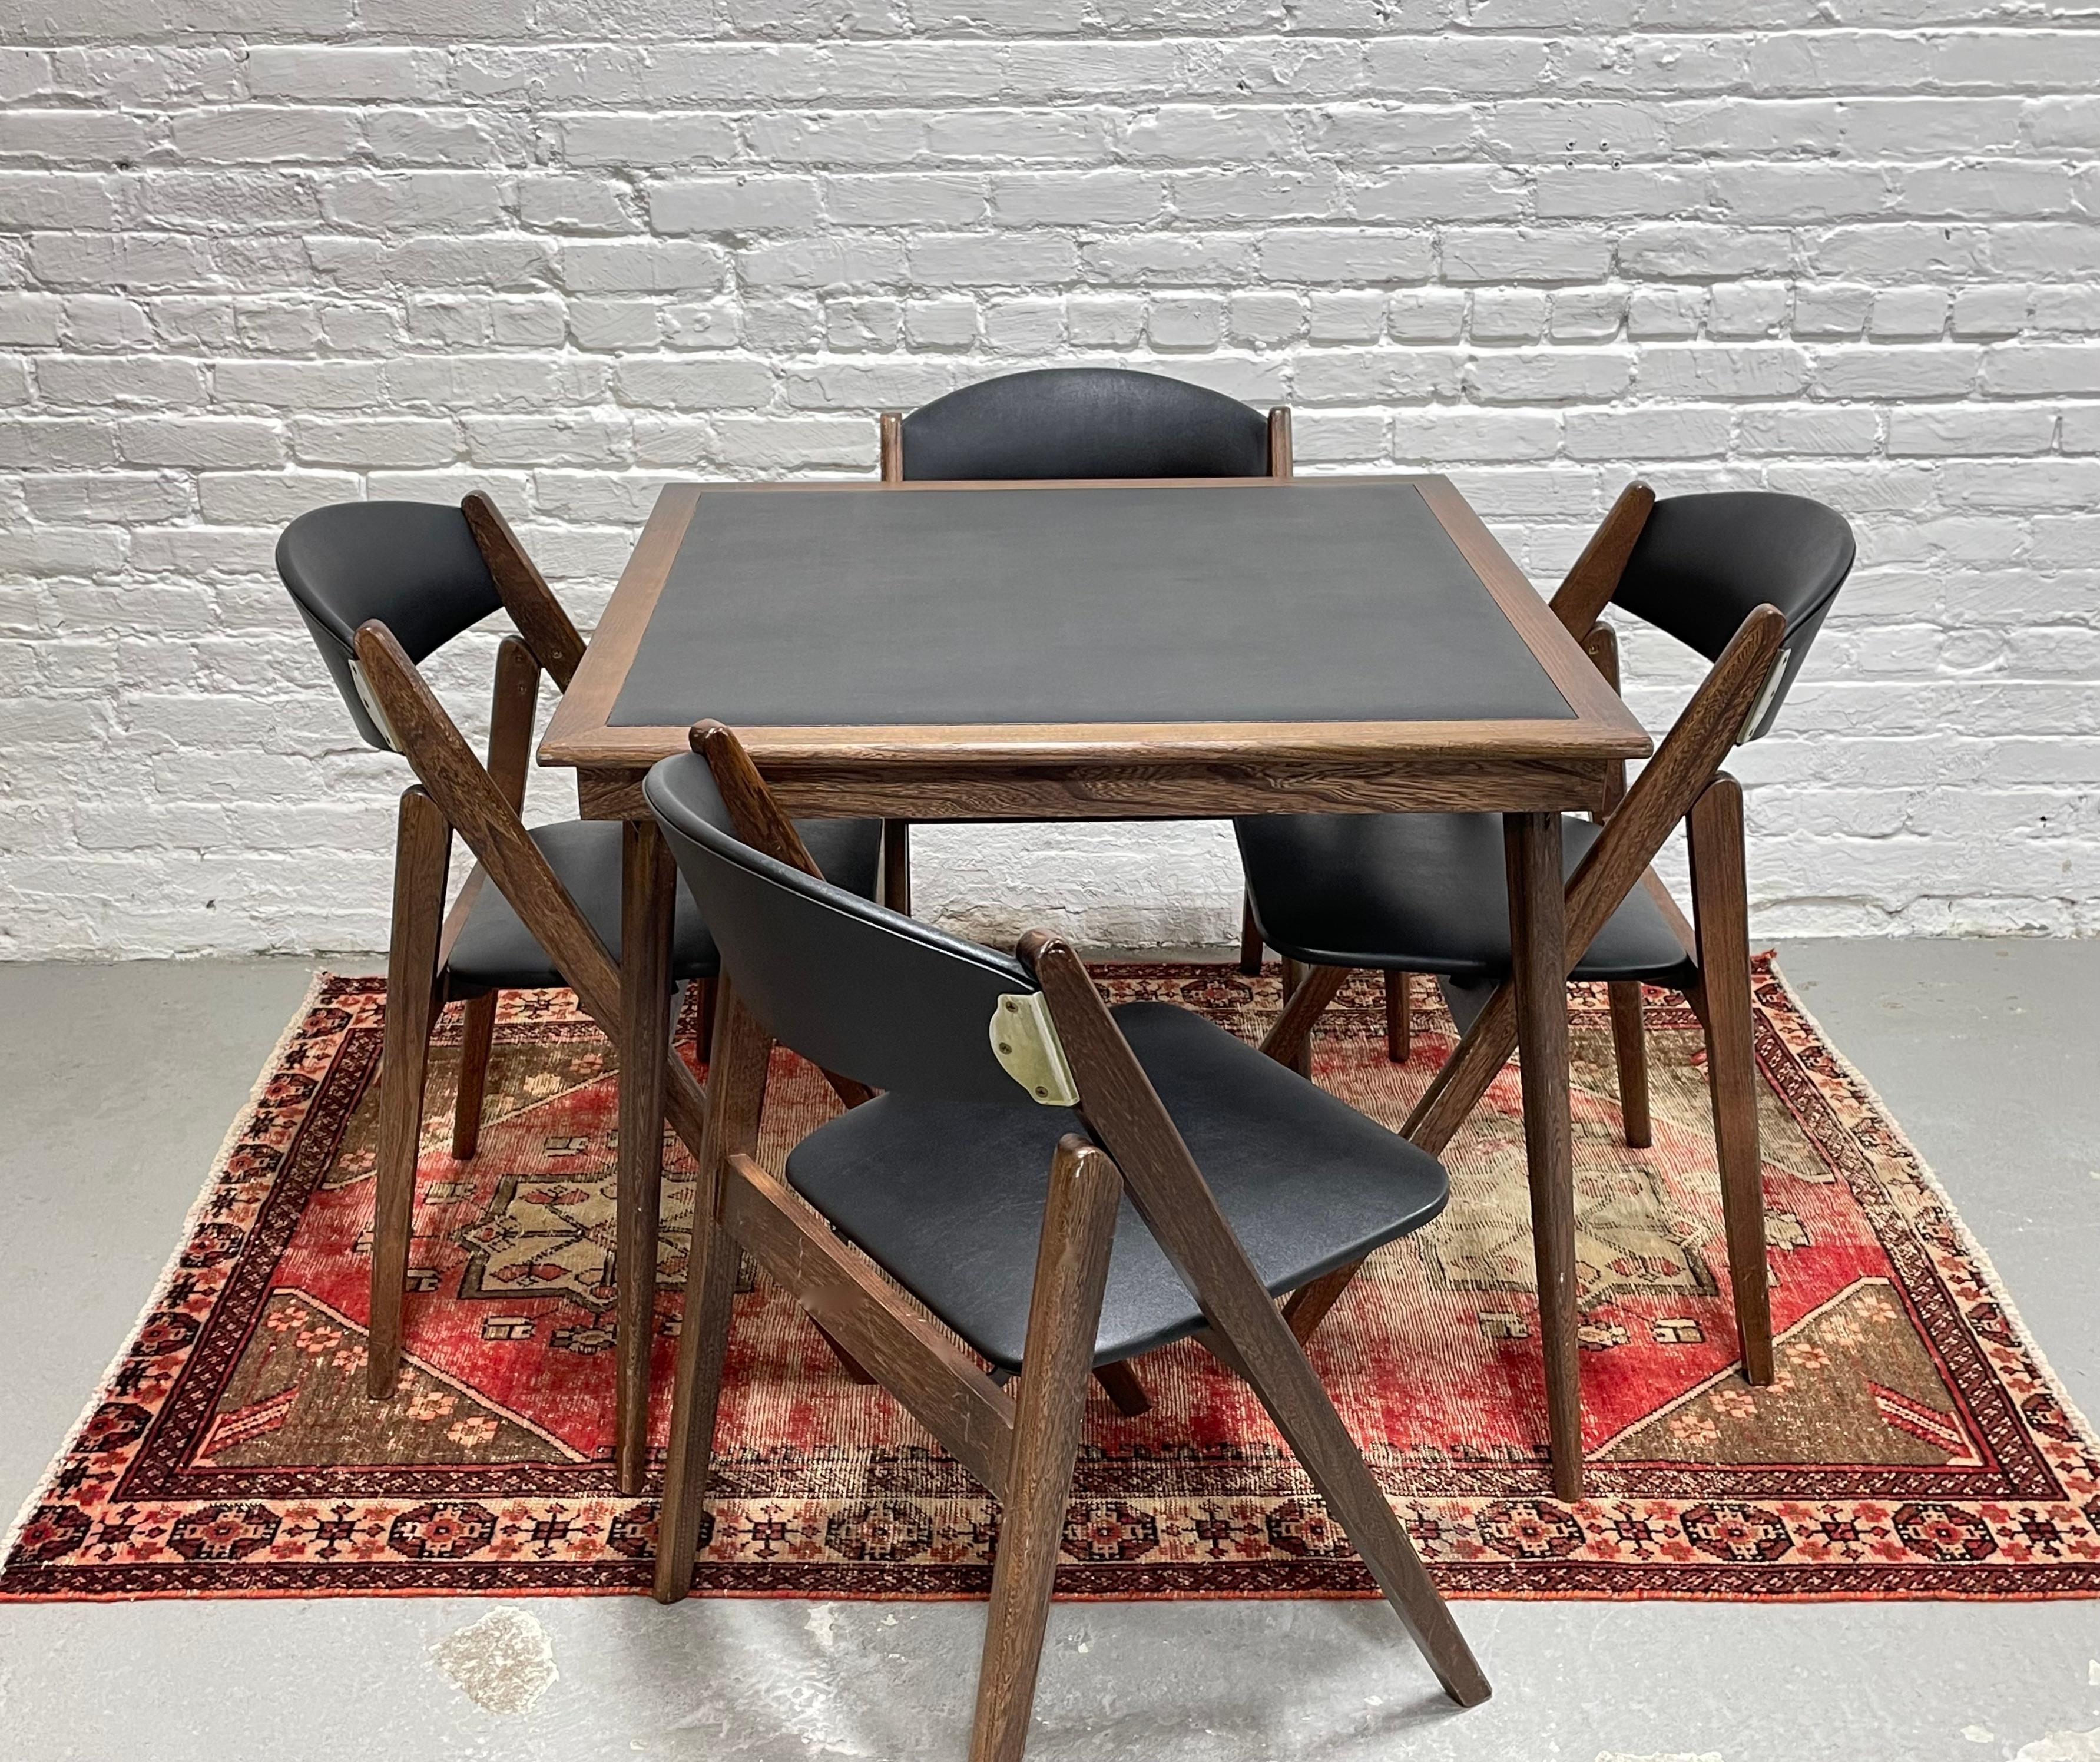 Mid century Modern foldable / collapsable dining set / game table set by Stakmore.  Both the table and chairs fold flat for easy storage when not in use. This is a perfect set for smaller apartments when you don't always need a dining table set up